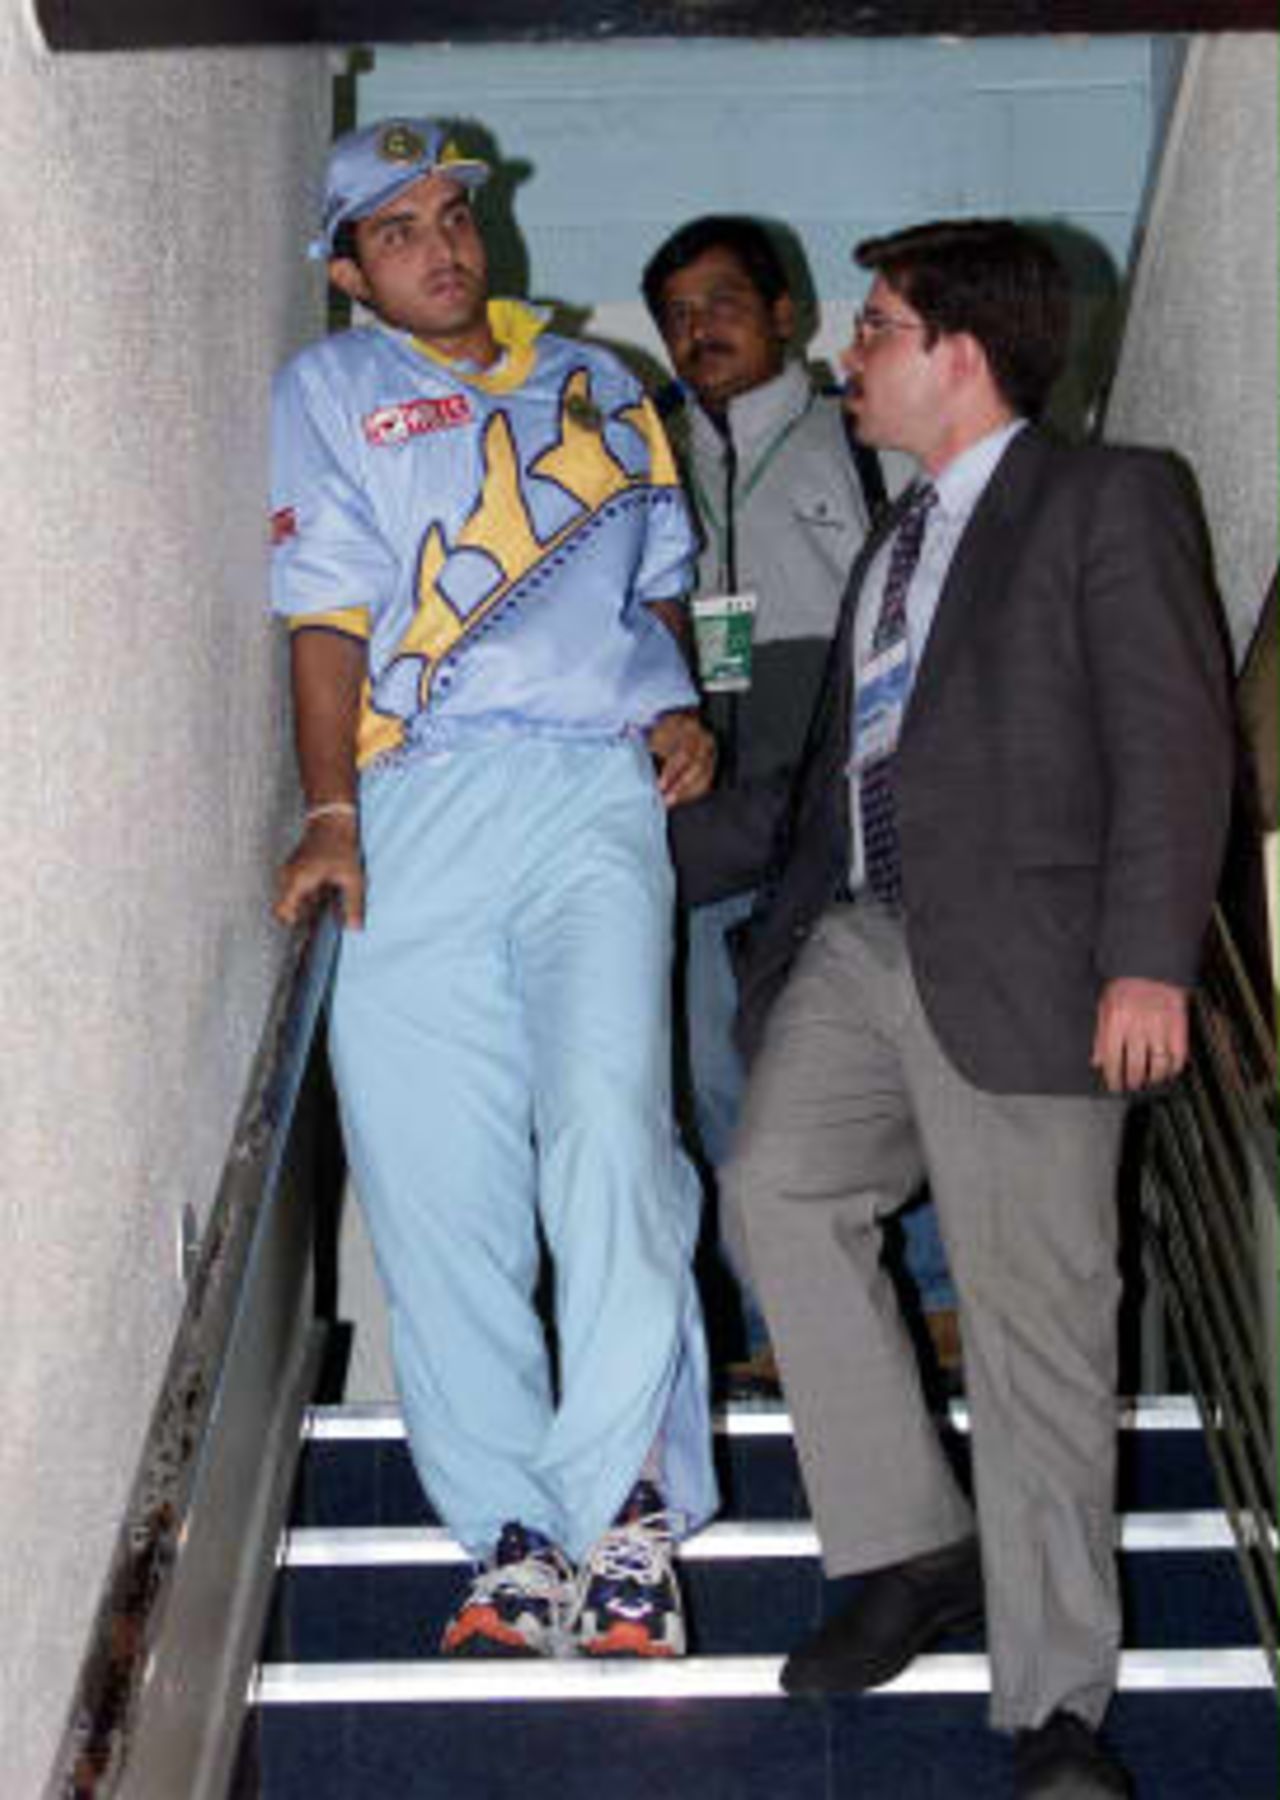 India's opening batsman Saurav Ganguly limps down the stairs as he talks to a journalist after watching his team during indoor practise, after this morning's practises for India and Pakistan were cancelled because of the water-logged Old Trafford pitch.